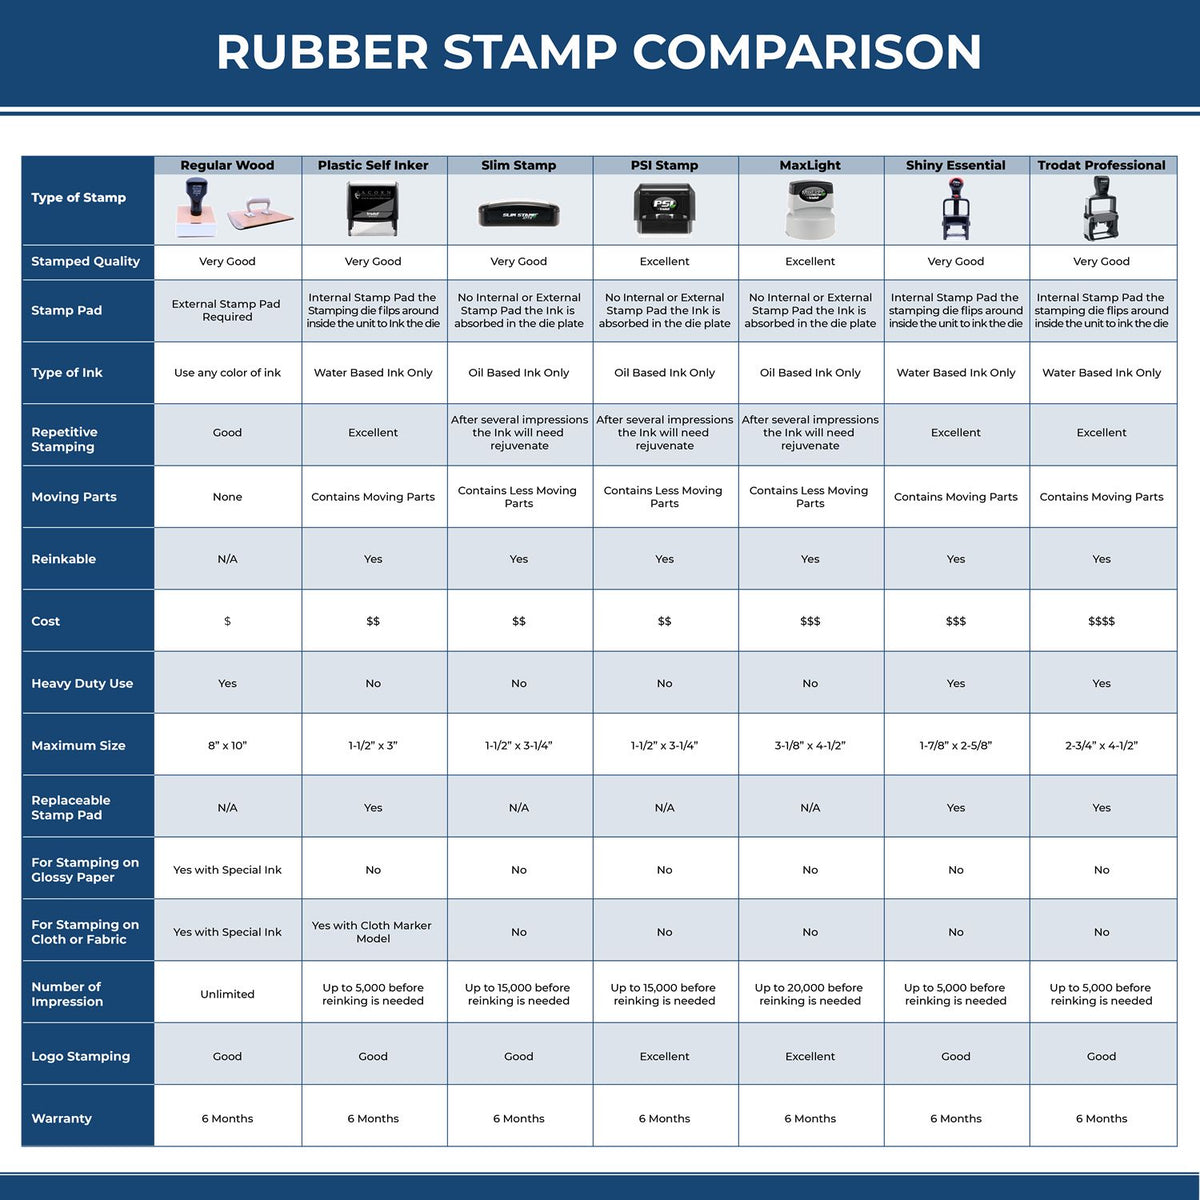 A comparison chart for the different types of mount models available for the Self-Inking Wyoming PE Stamp.